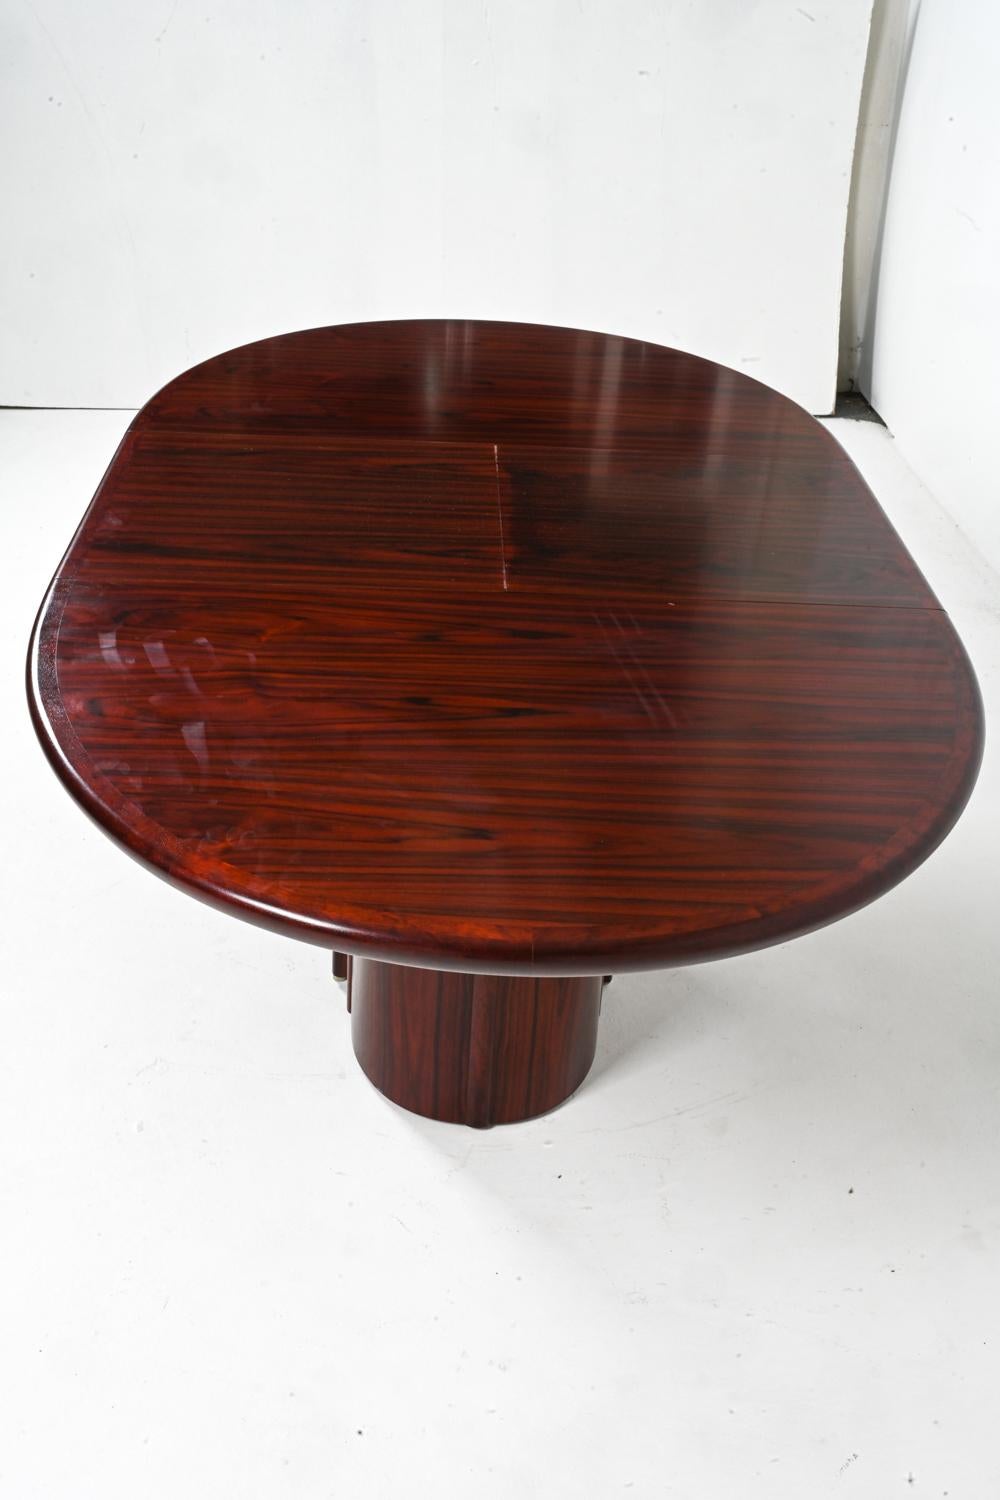 20th Century Art Deco-Style Butterfly Leaf Dining Table by Skovby, Denmark 1970's For Sale